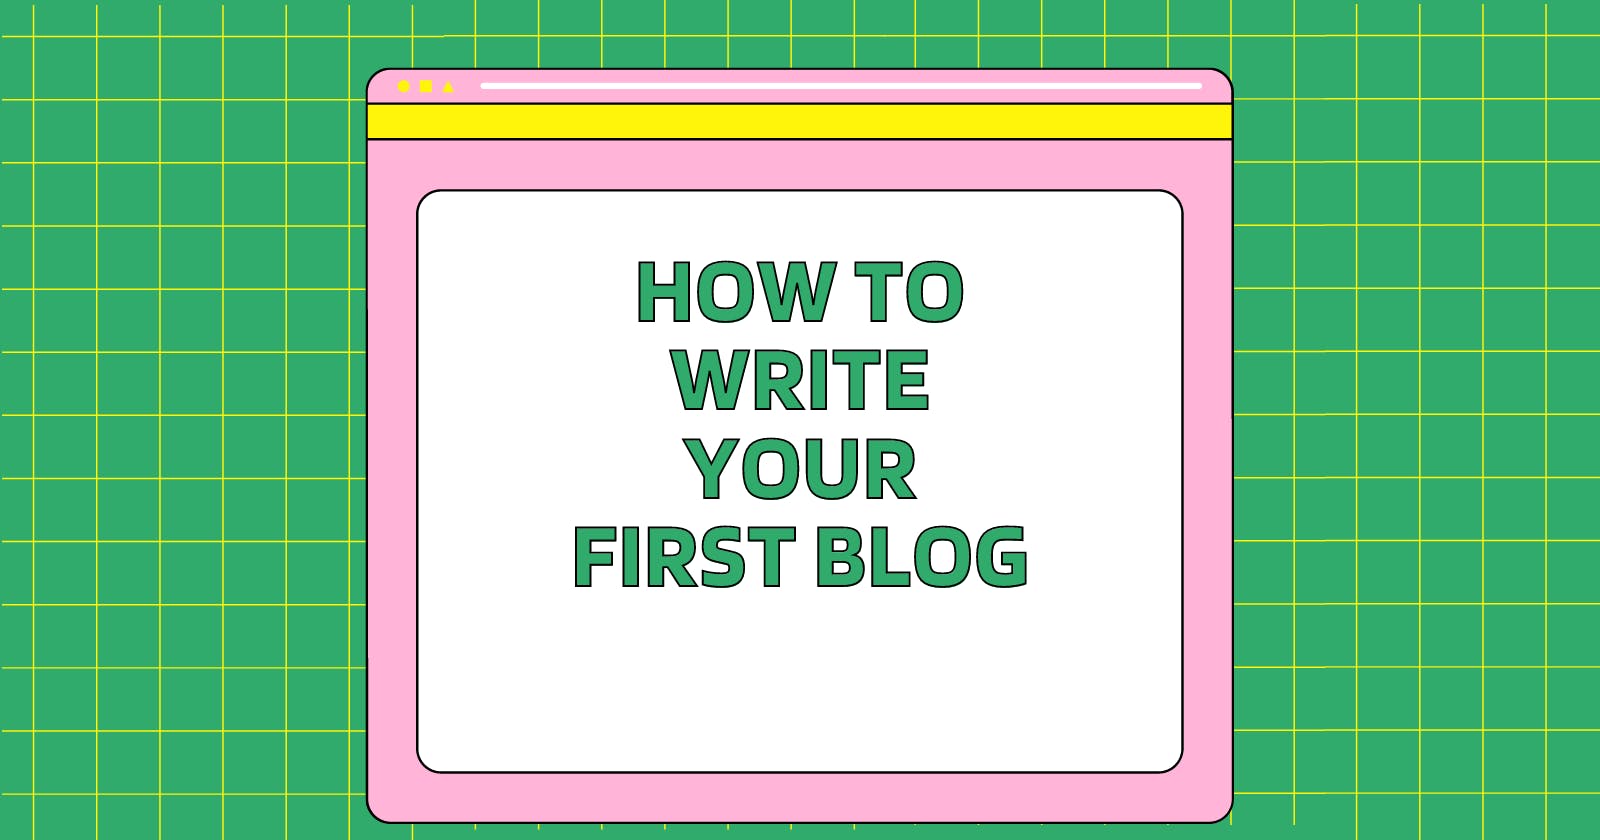 How to write your first blog